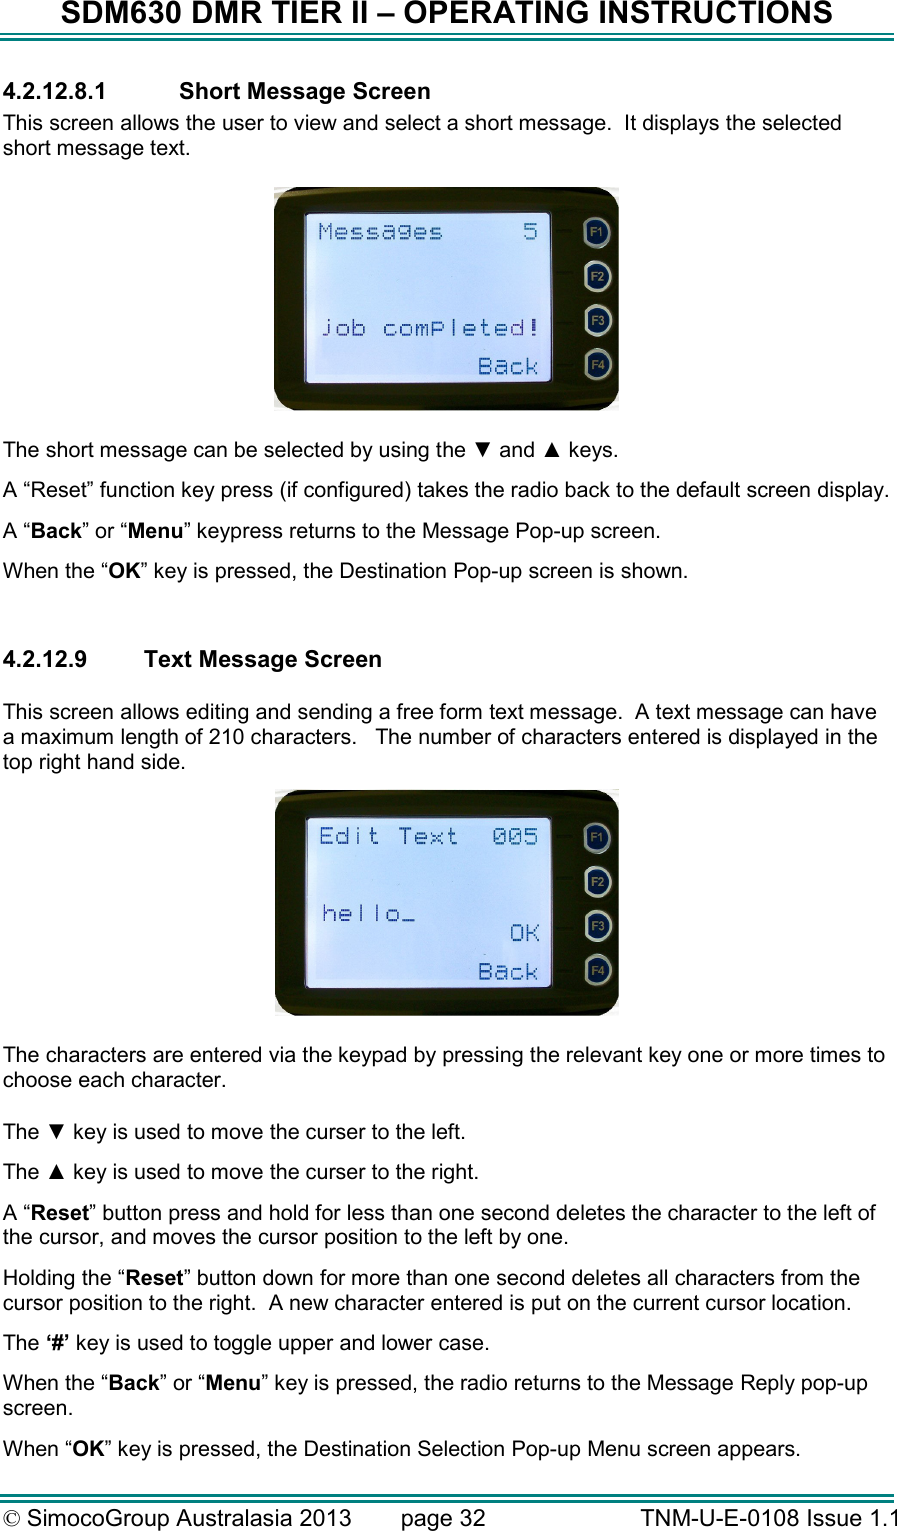 SDM630 DMR TIER II – OPERATING INSTRUCTIONS © SimocoGroup Australasia 2013   page 32   TNM-U-E-0108 Issue 1.1 4.2.12.8.1  Short Message Screen This screen allows the user to view and select a short message.  It displays the selected short message text.    The short message can be selected by using the ▼ and ▲ keys. A “Reset” function key press (if configured) takes the radio back to the default screen display. A “Back” or “Menu” keypress returns to the Message Pop-up screen.  When the “OK” key is pressed, the Destination Pop-up screen is shown.  4.2.12.9  Text Message Screen  This screen allows editing and sending a free form text message.  A text message can have a maximum length of 210 characters.   The number of characters entered is displayed in the top right hand side.   The characters are entered via the keypad by pressing the relevant key one or more times to choose each character.  The ▼ key is used to move the curser to the left. The ▲ key is used to move the curser to the right. A “Reset” button press and hold for less than one second deletes the character to the left of the cursor, and moves the cursor position to the left by one.   Holding the “Reset” button down for more than one second deletes all characters from the cursor position to the right.  A new character entered is put on the current cursor location.   The ‘#’ key is used to toggle upper and lower case. When the “Back” or “Menu” key is pressed, the radio returns to the Message Reply pop-up screen. When “OK” key is pressed, the Destination Selection Pop-up Menu screen appears. 